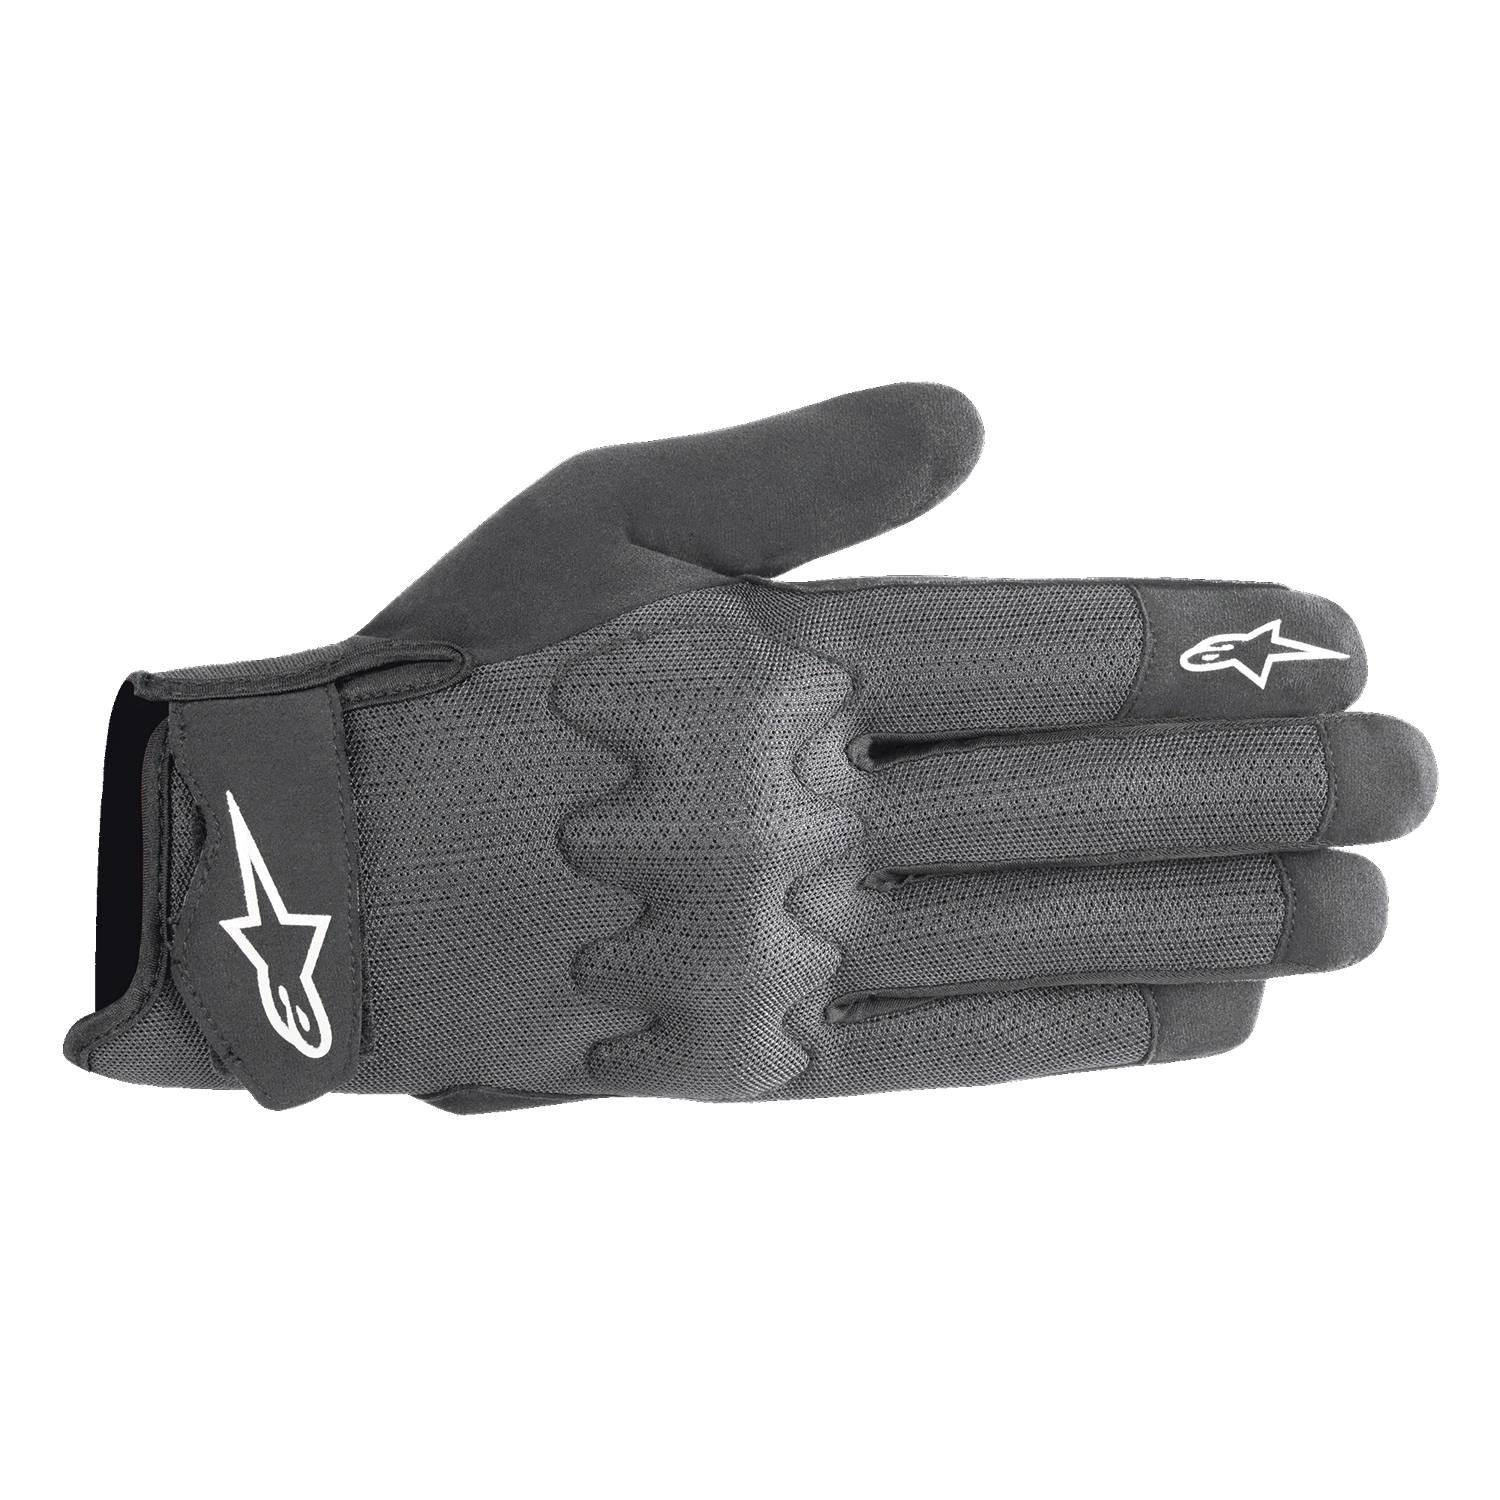 Image of Alpinestars Stated Air Gloves Black Silver Size 3XL EN